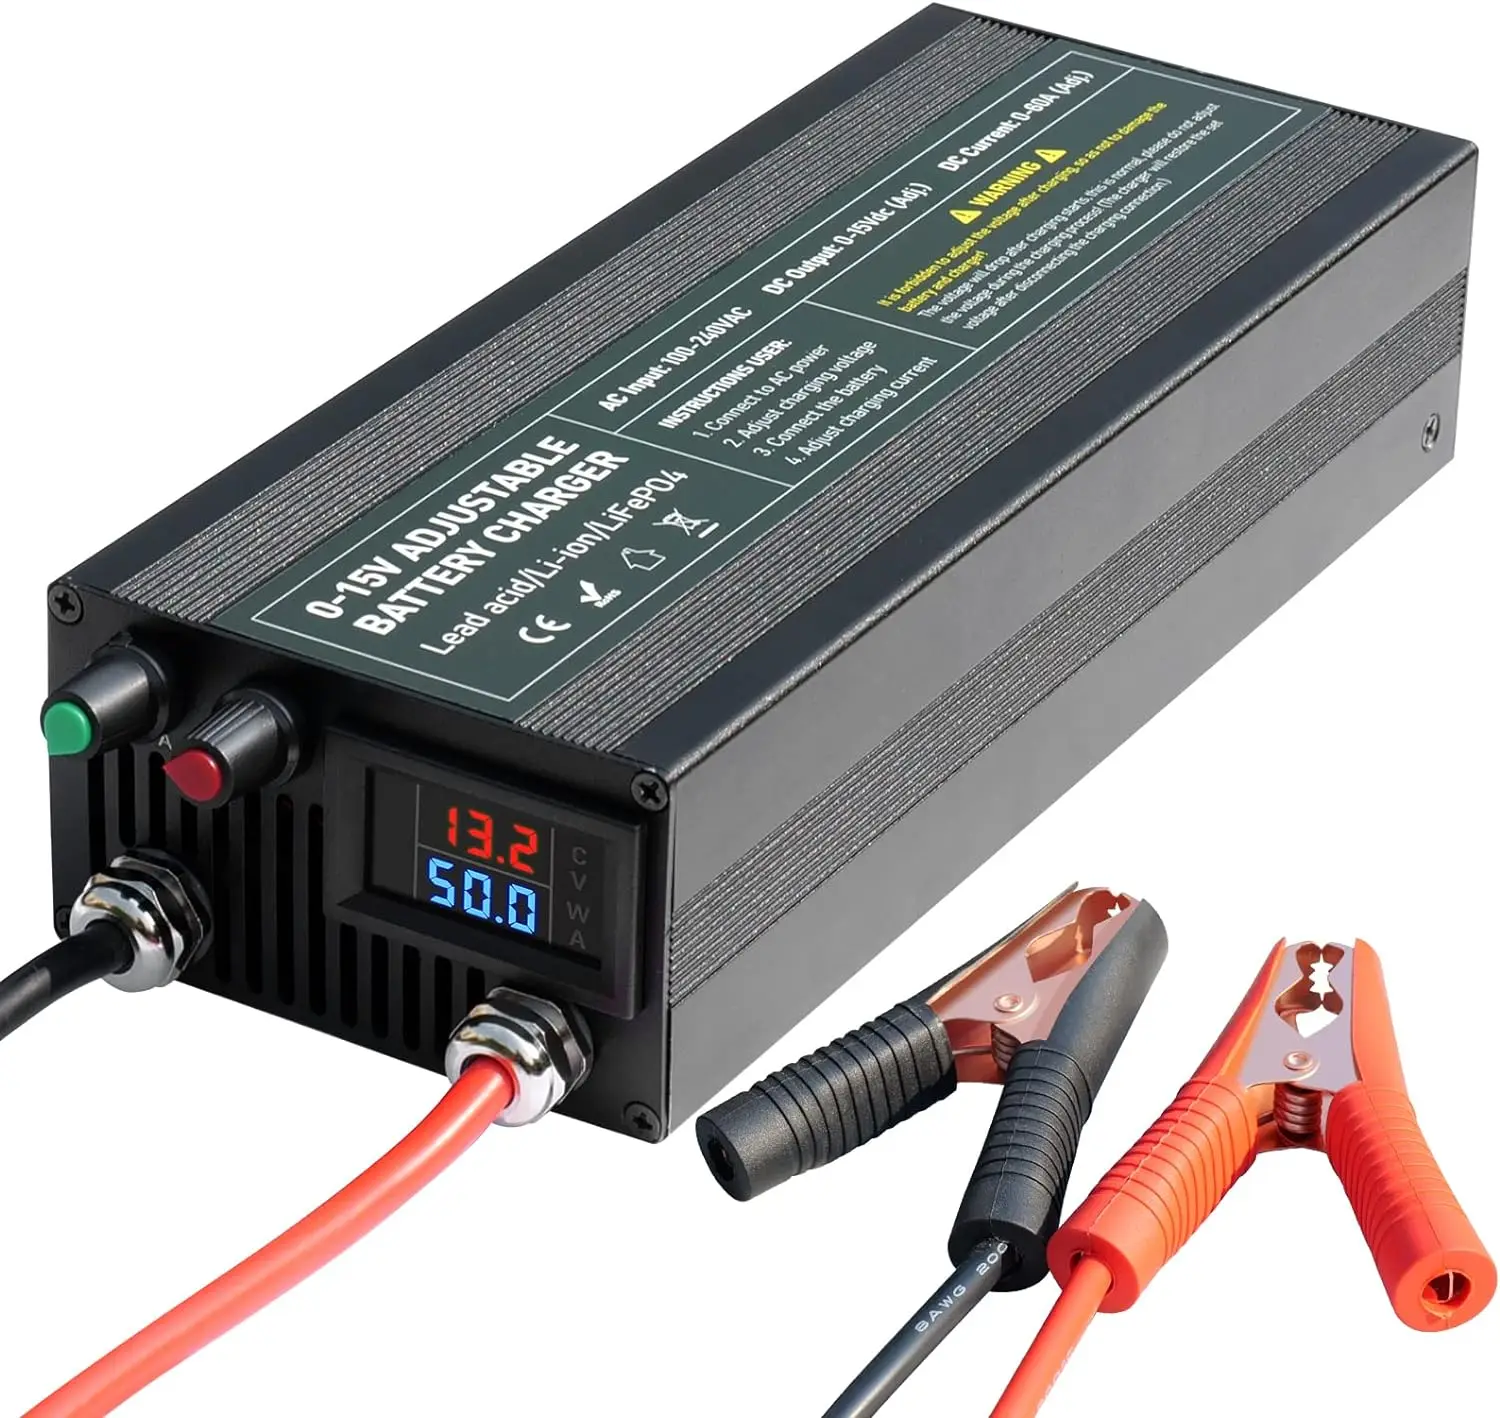 

12V High Power Lifepo4 Charger Smart Battery Charger Maintainer with 0-15V Adjustable Current and Voltage, 12.6V Portable Power